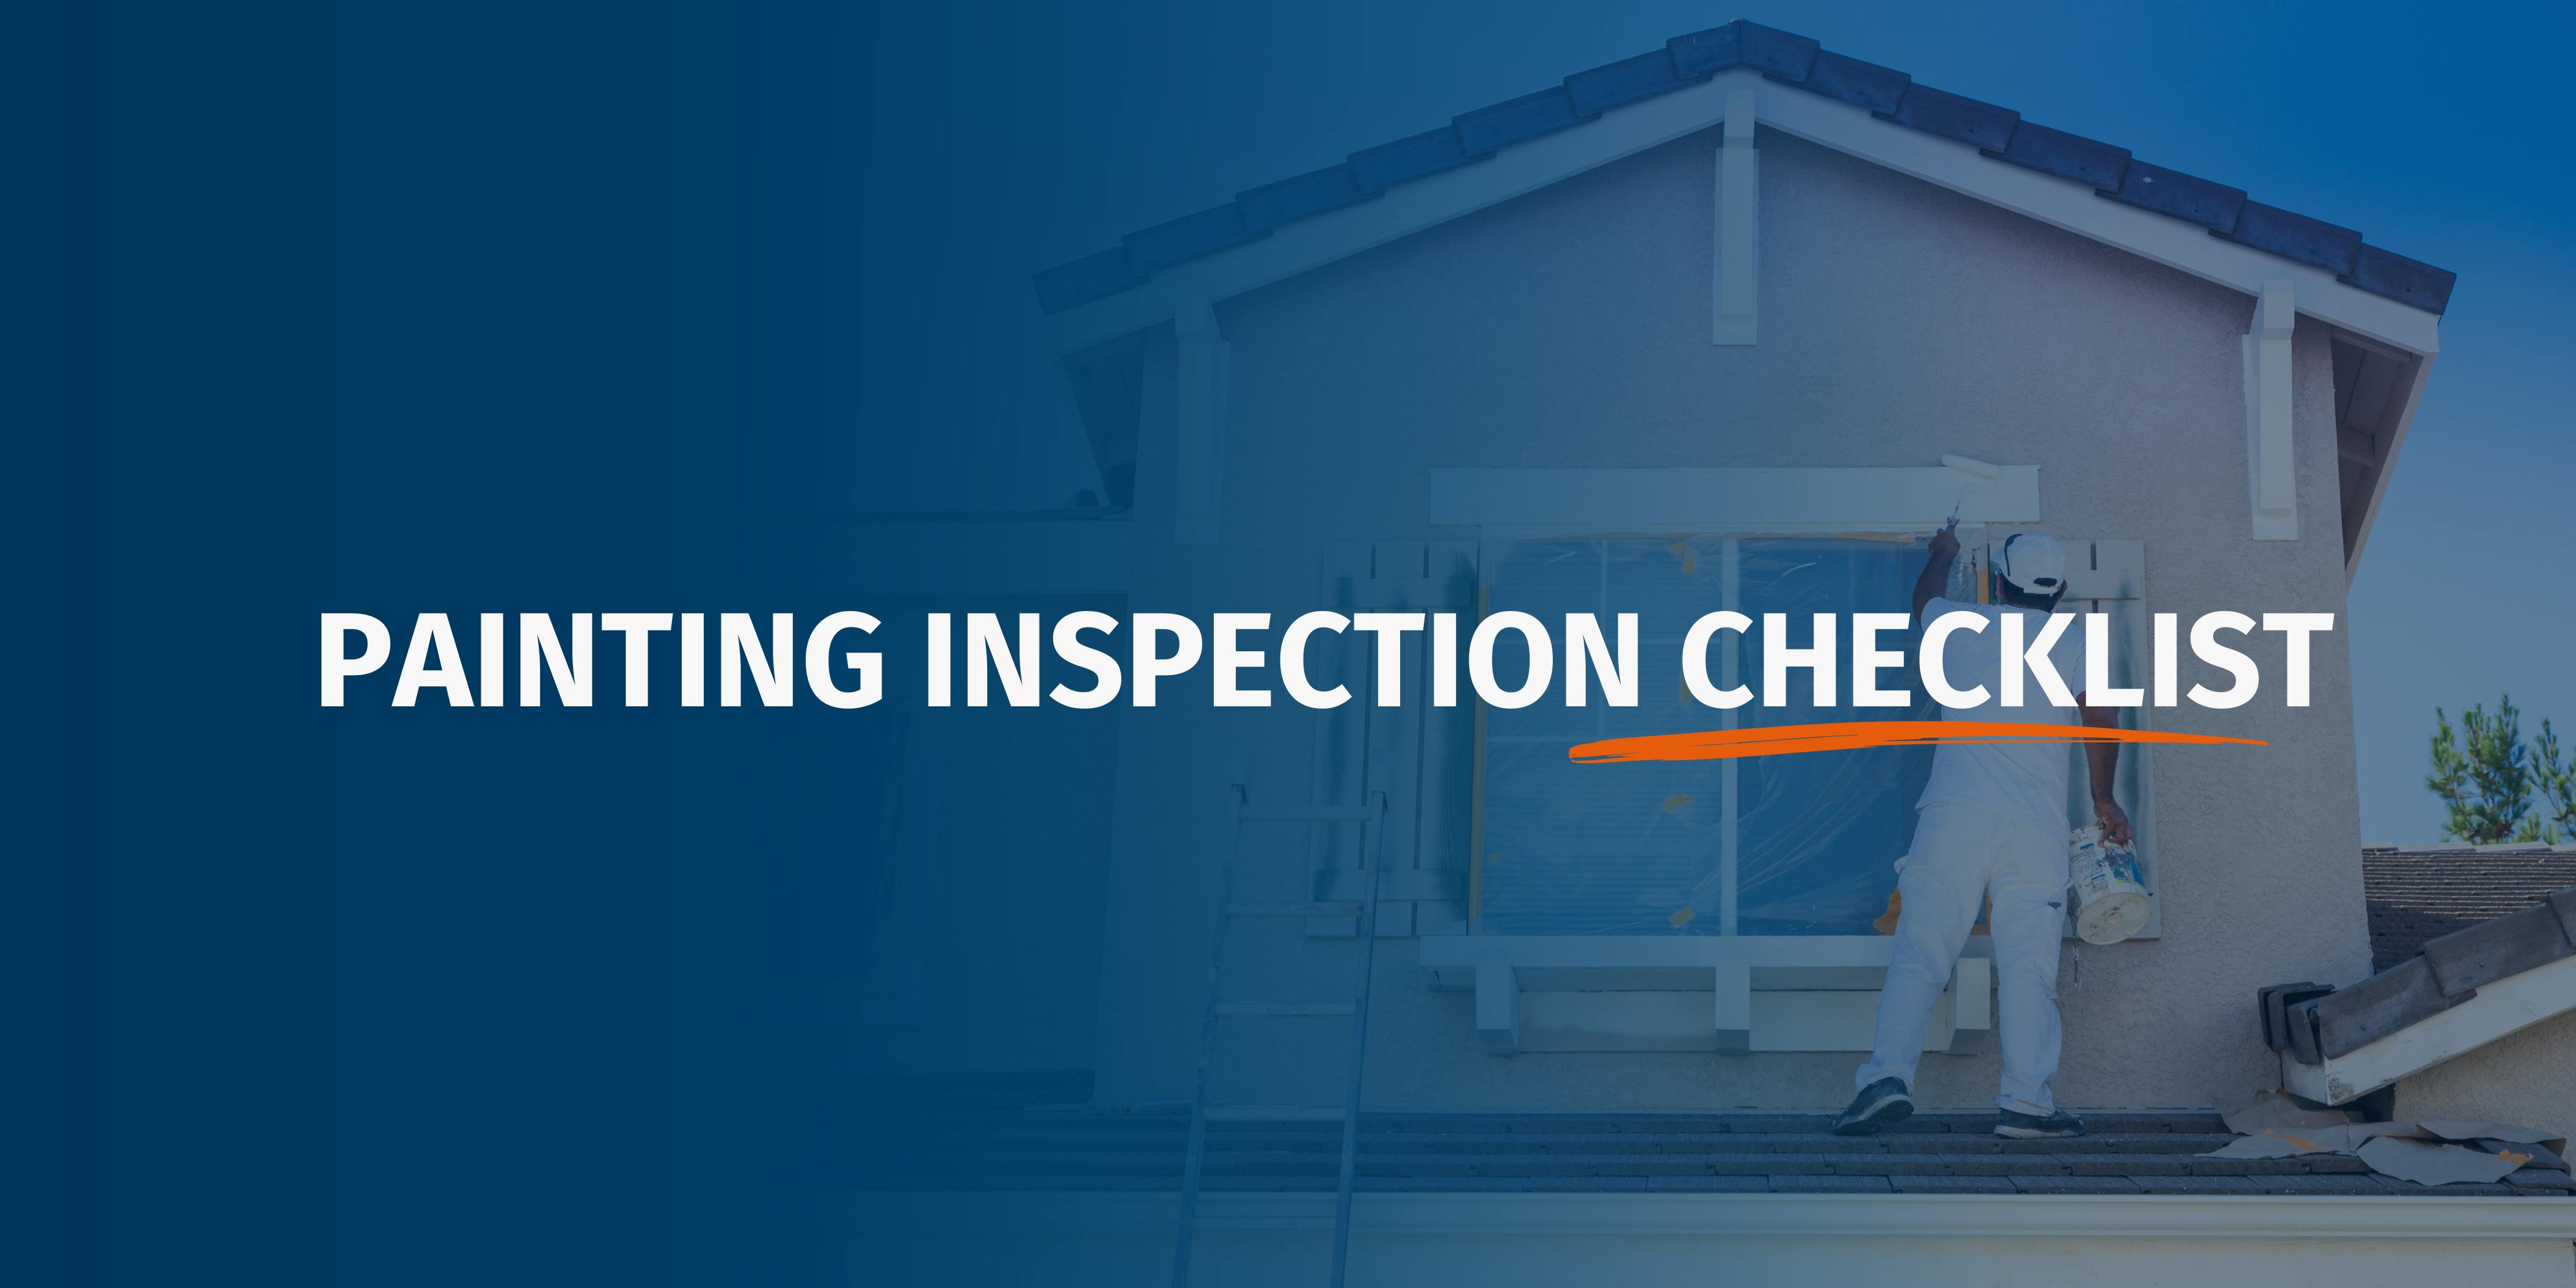 Painting Inspection Checklist